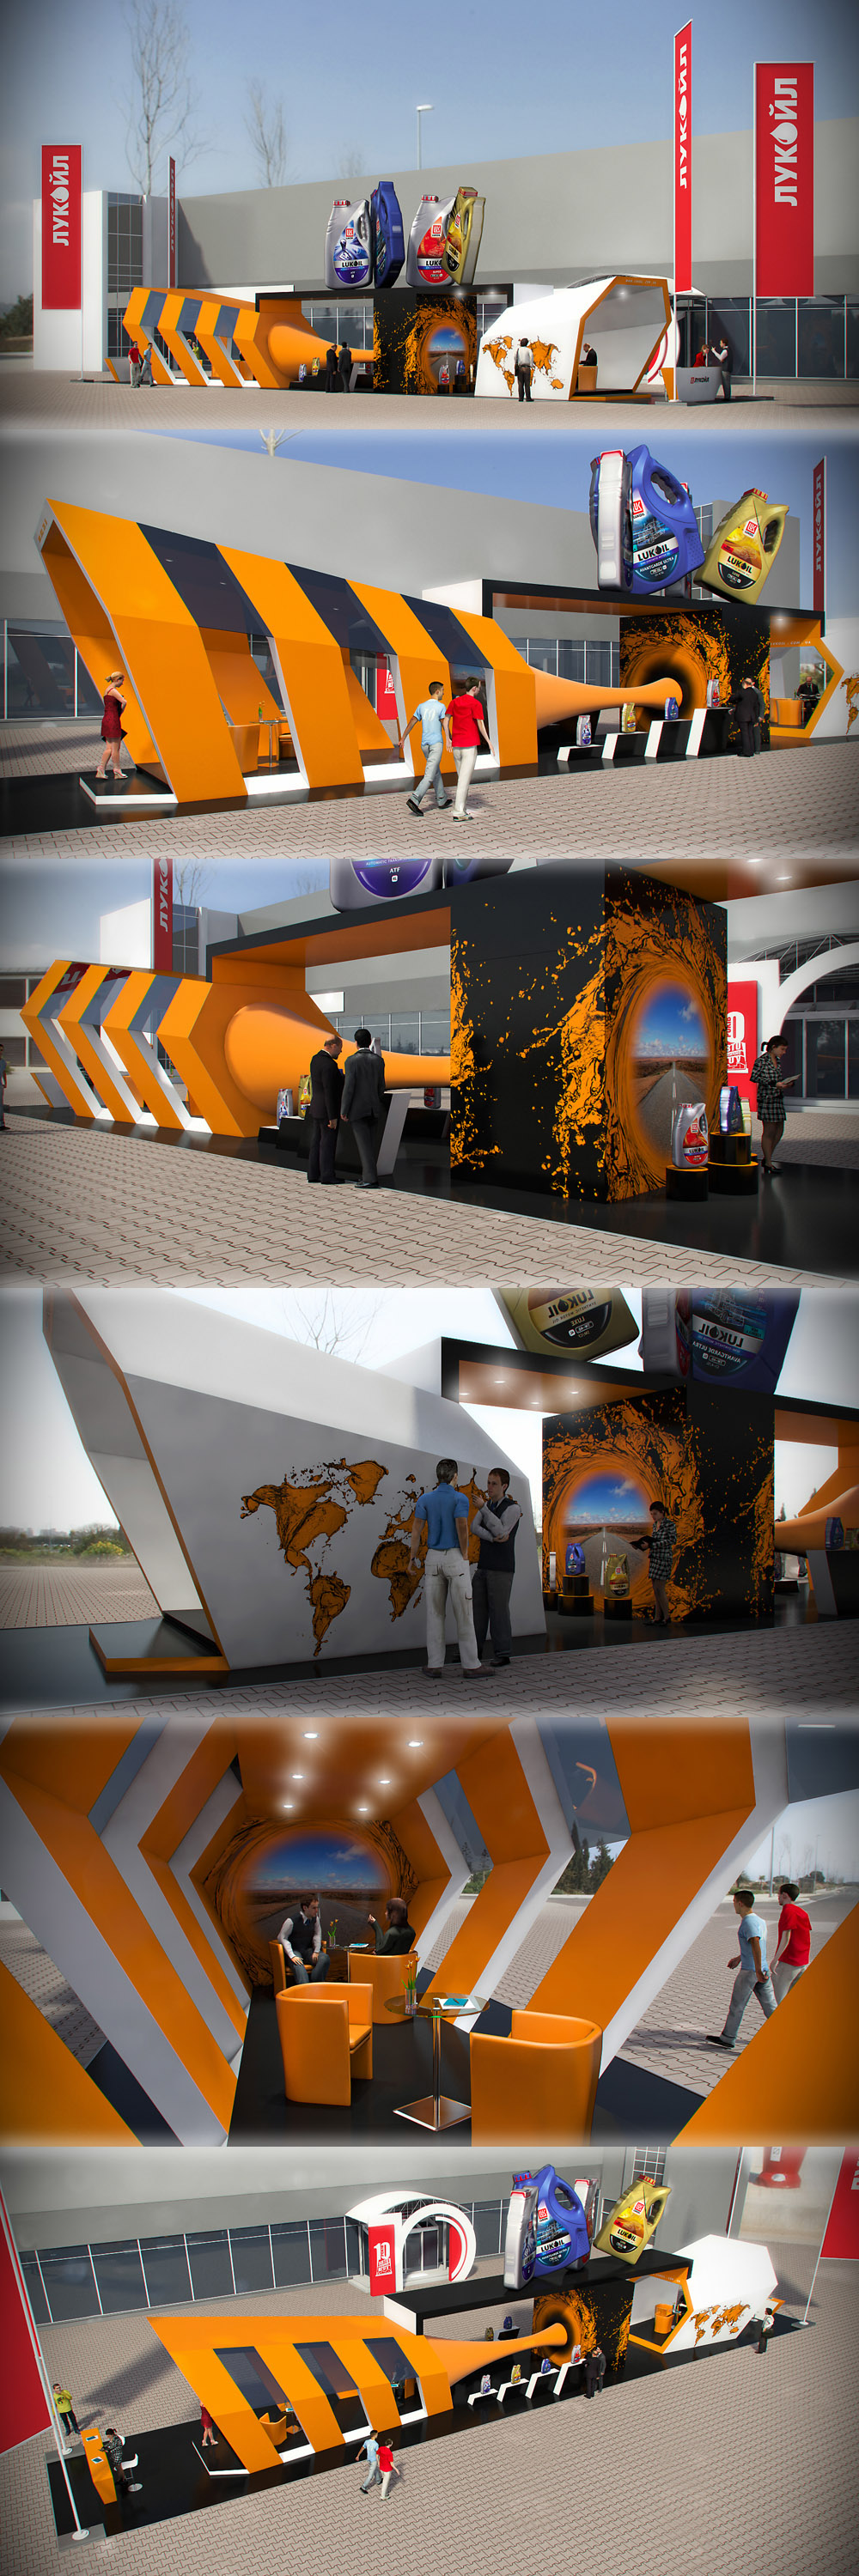 exhibit autoshow expo Stand trade fair Fair Temporary Architecture brand architecture Event booth lukoil exhibition stand tradeshow messestand